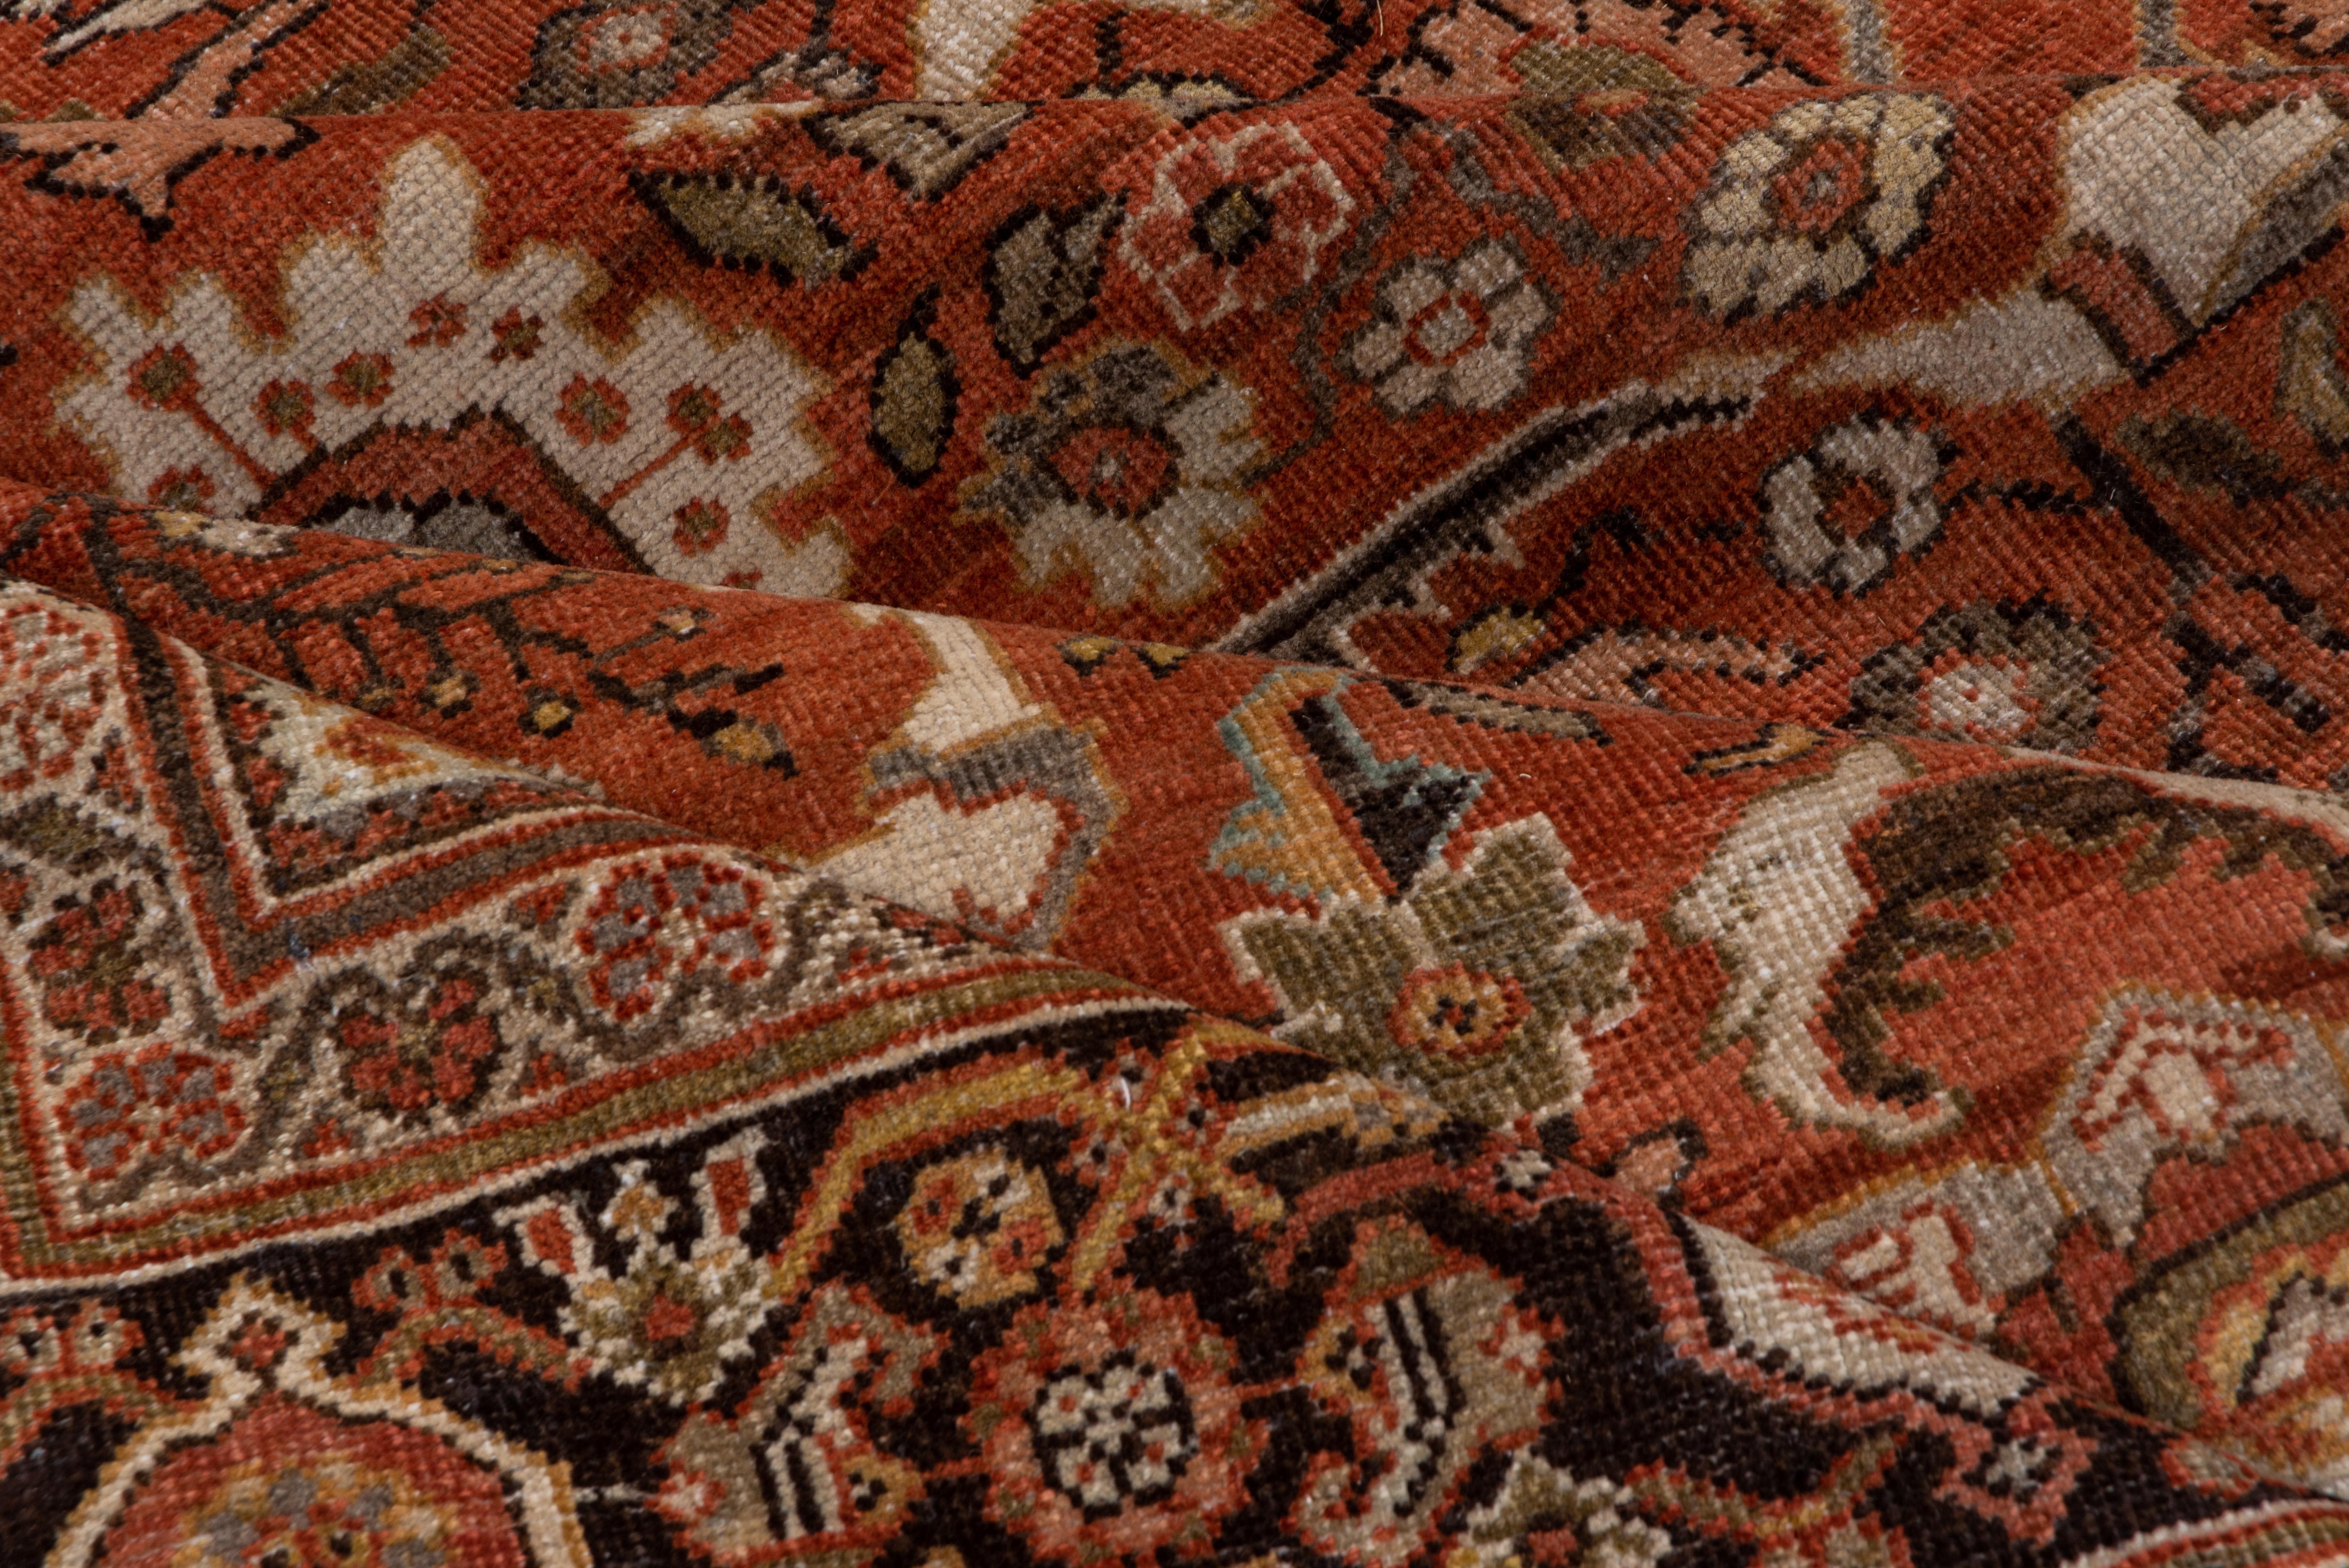 Hand-Knotted 1930s Tribal Antique Persian Mahal Rug, Rust Allover Field, Dark Brown Borders